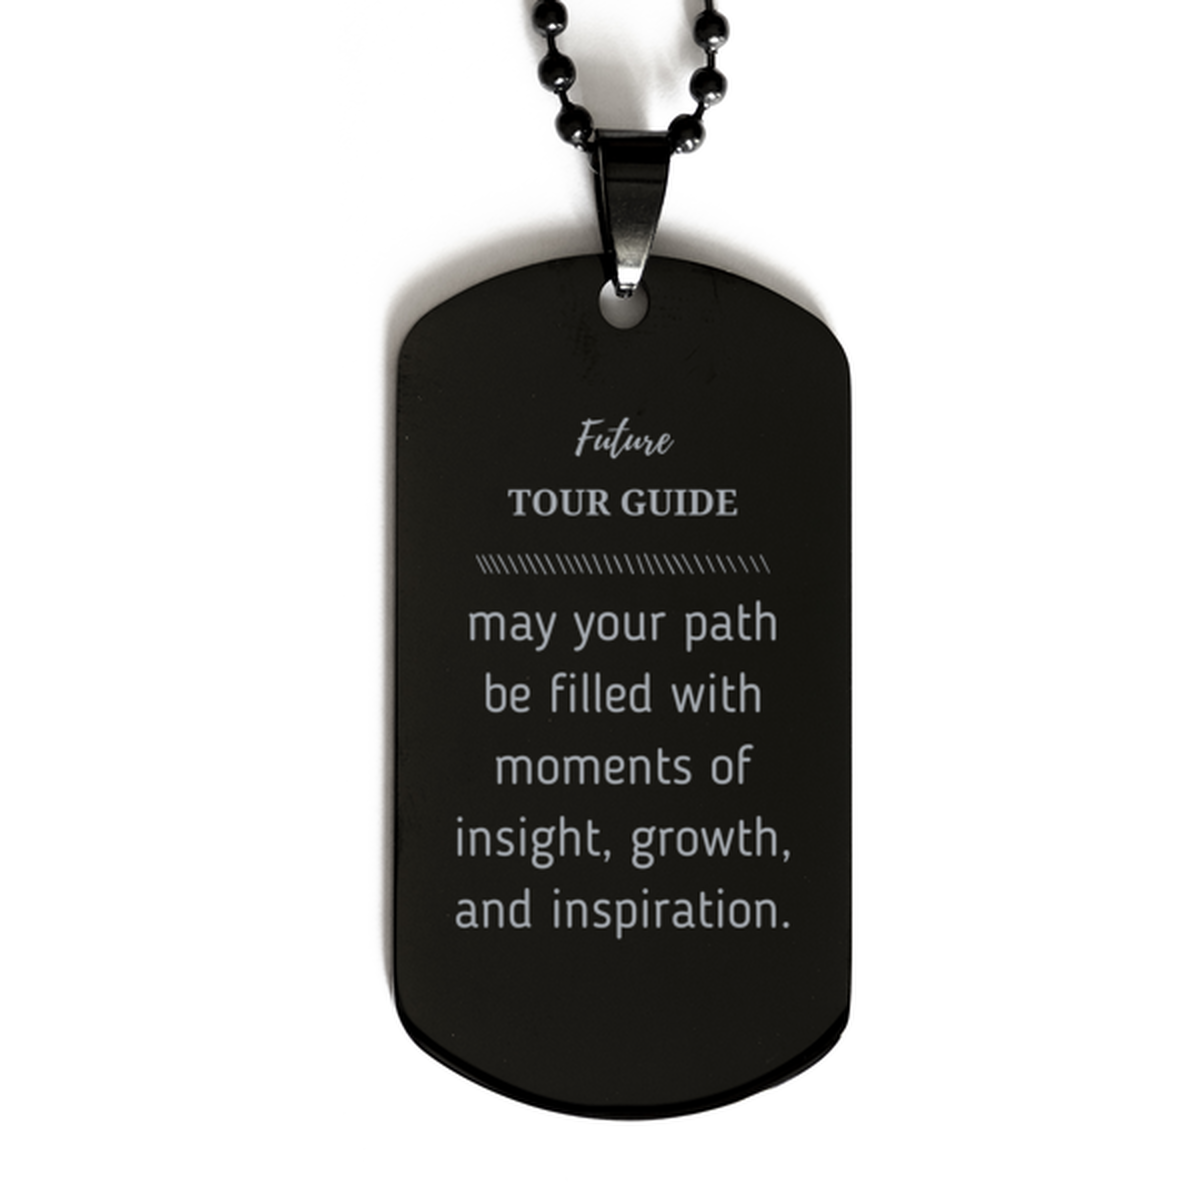 Future Tour Guide Gifts, May your path be filled with moments of insight, Graduation Gifts for New Tour Guide, Christmas Unique Black Dog Tag For Men, Women, Friends